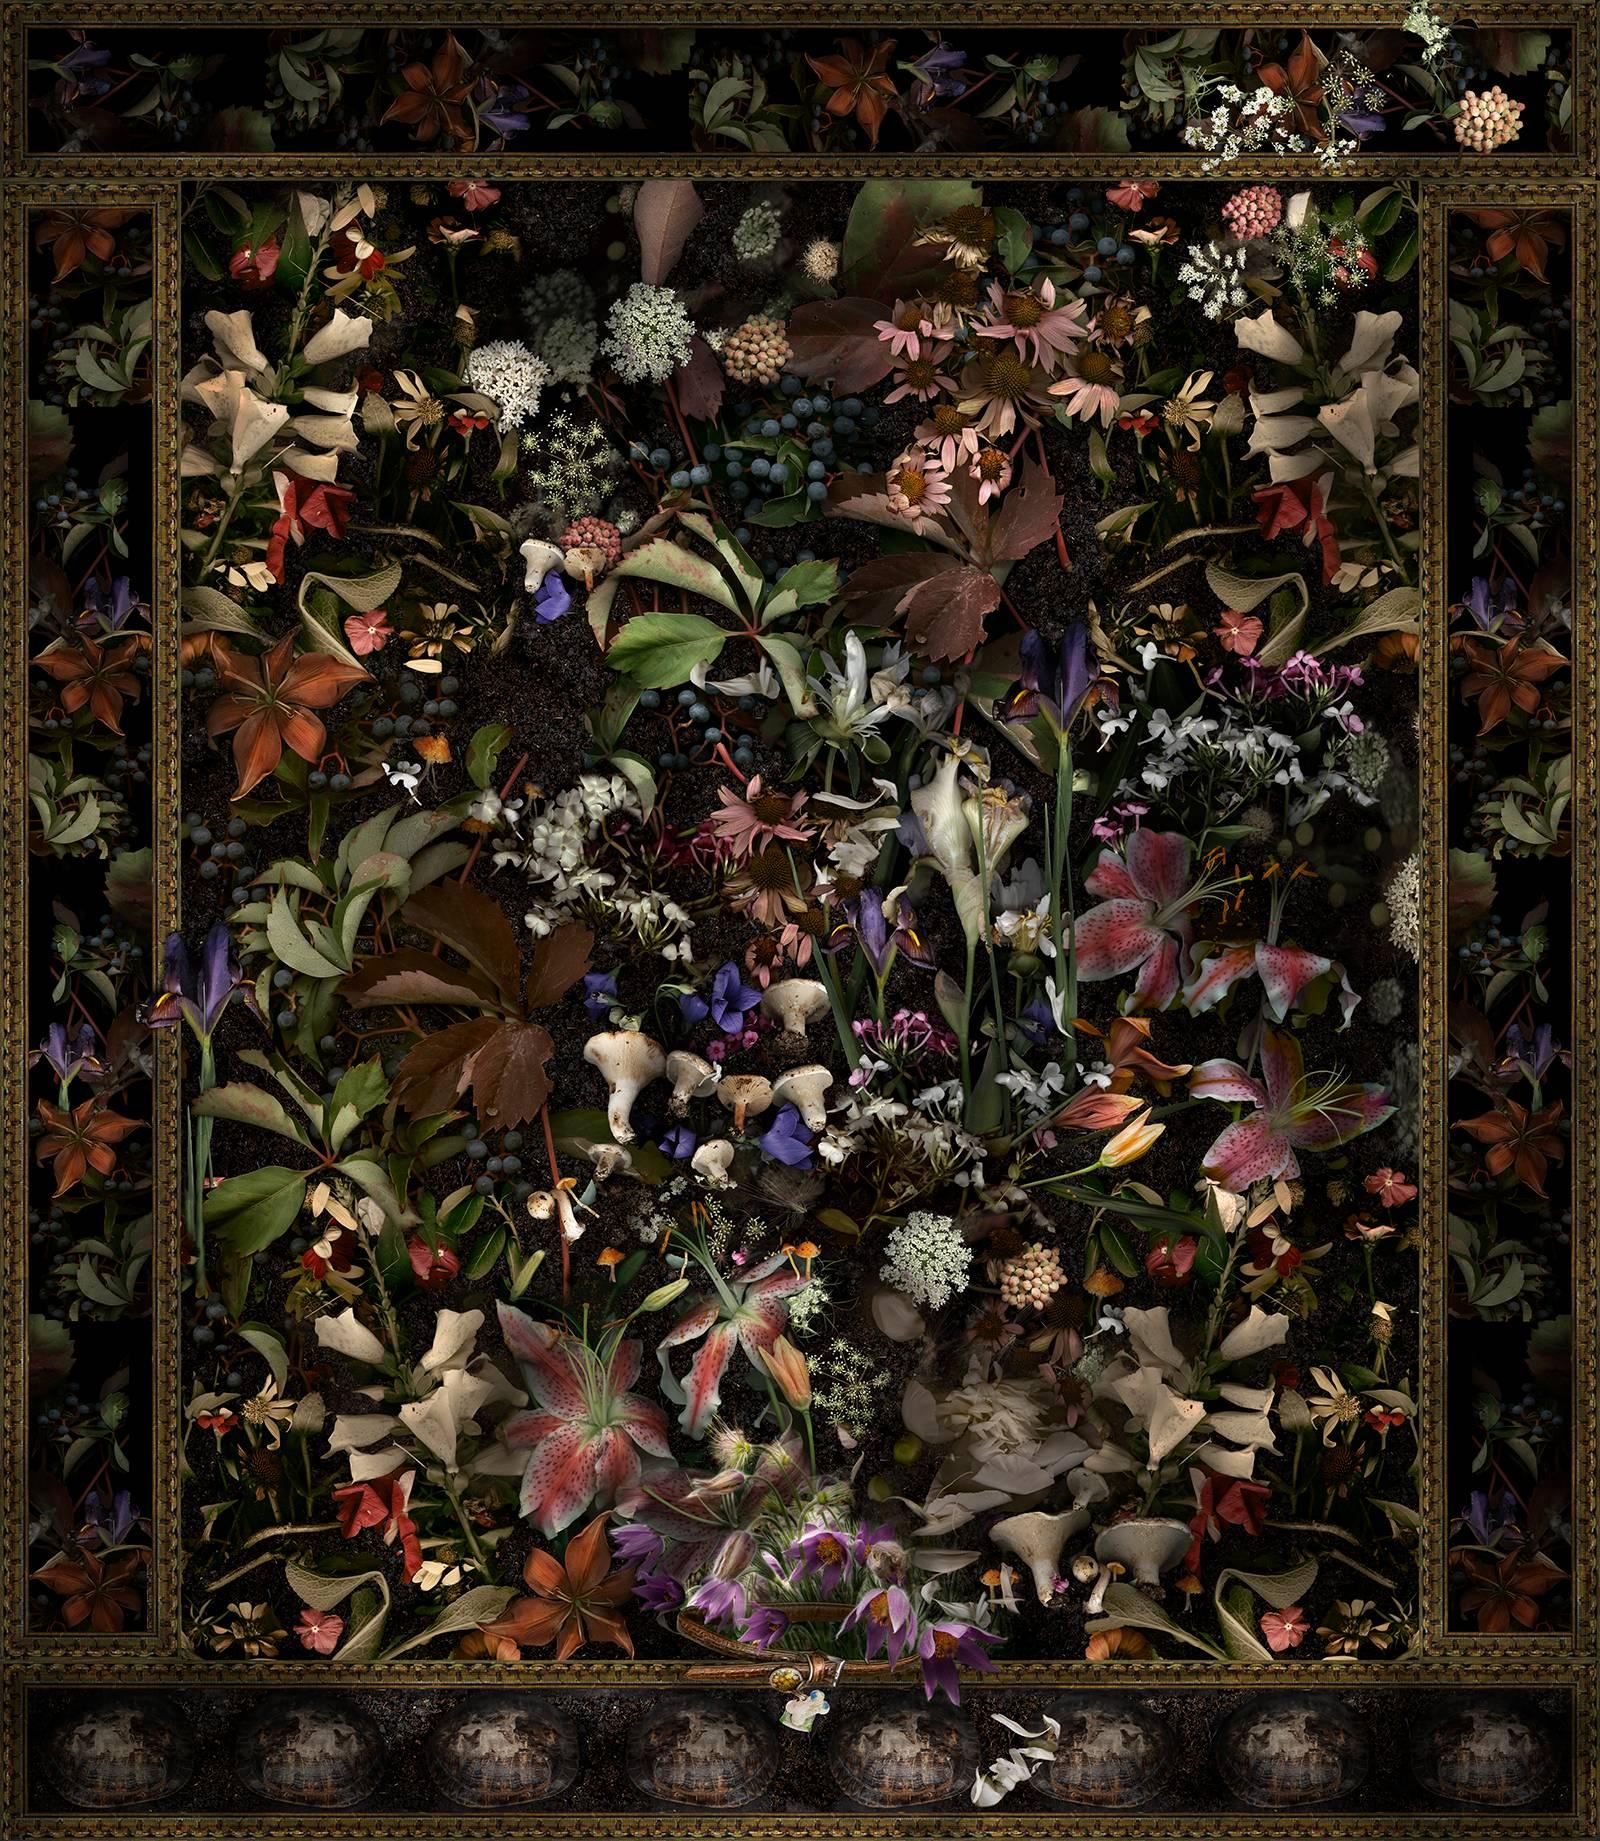 Lisa A. Frank Still-Life Photograph - For Scout A, Very Good Dog: Modern Baroque Style Floral Still Life Digital Print